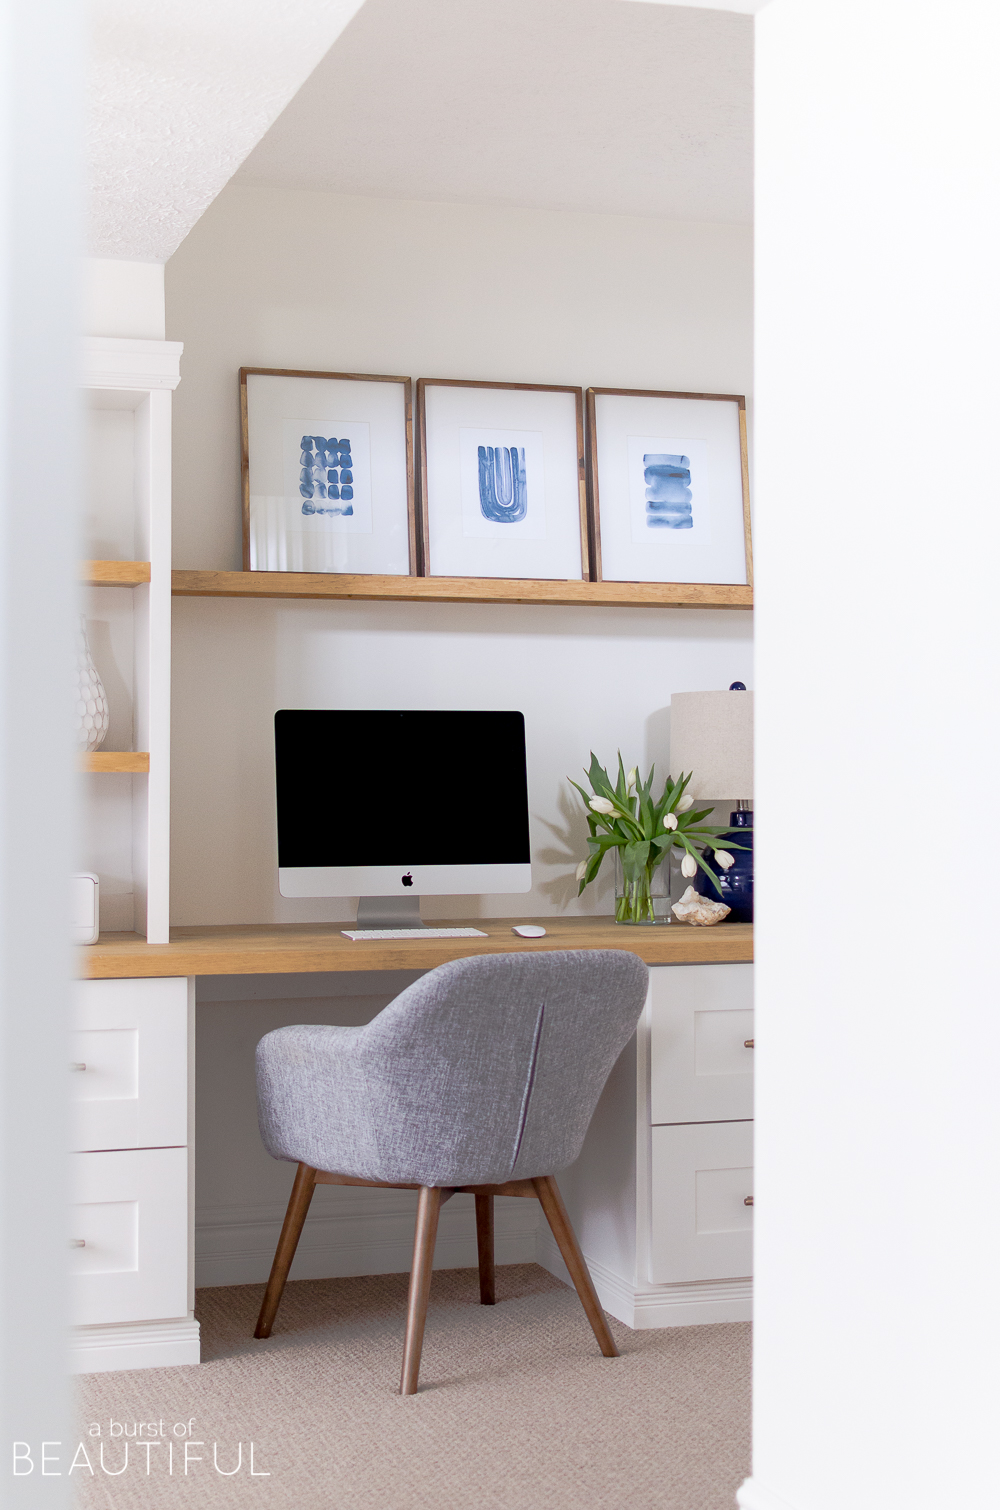 A small nook provides the perfect space for home office or studio, with this simple built-in desk